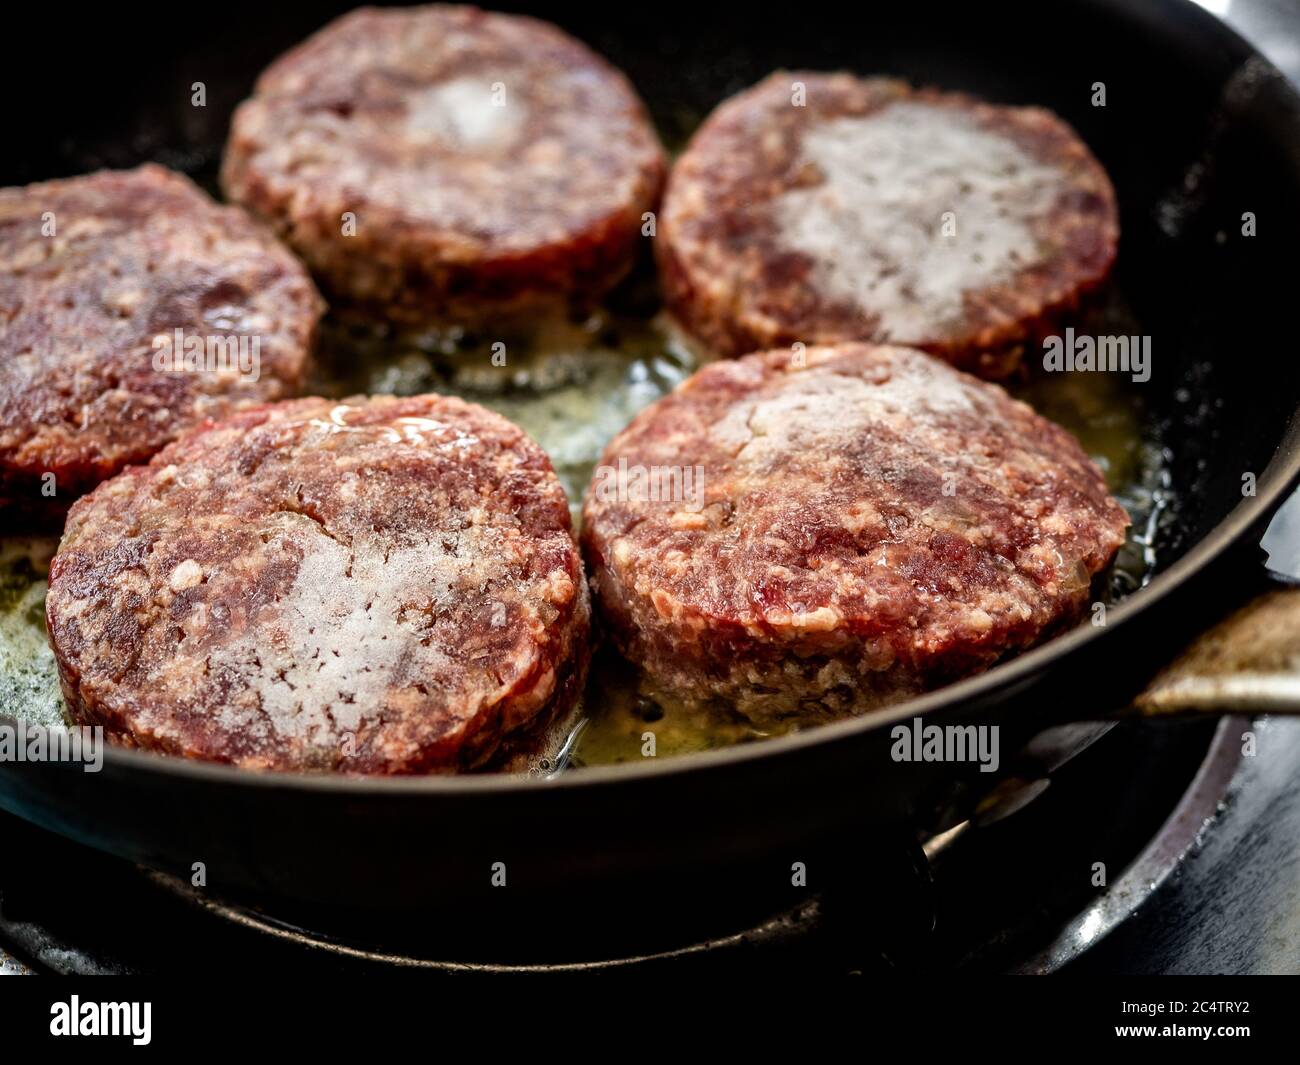 Frozen beef burgers just fried in frying pan. Close-up homemade juicy minced meat patties burgers in iron frying pan. Stock Photo